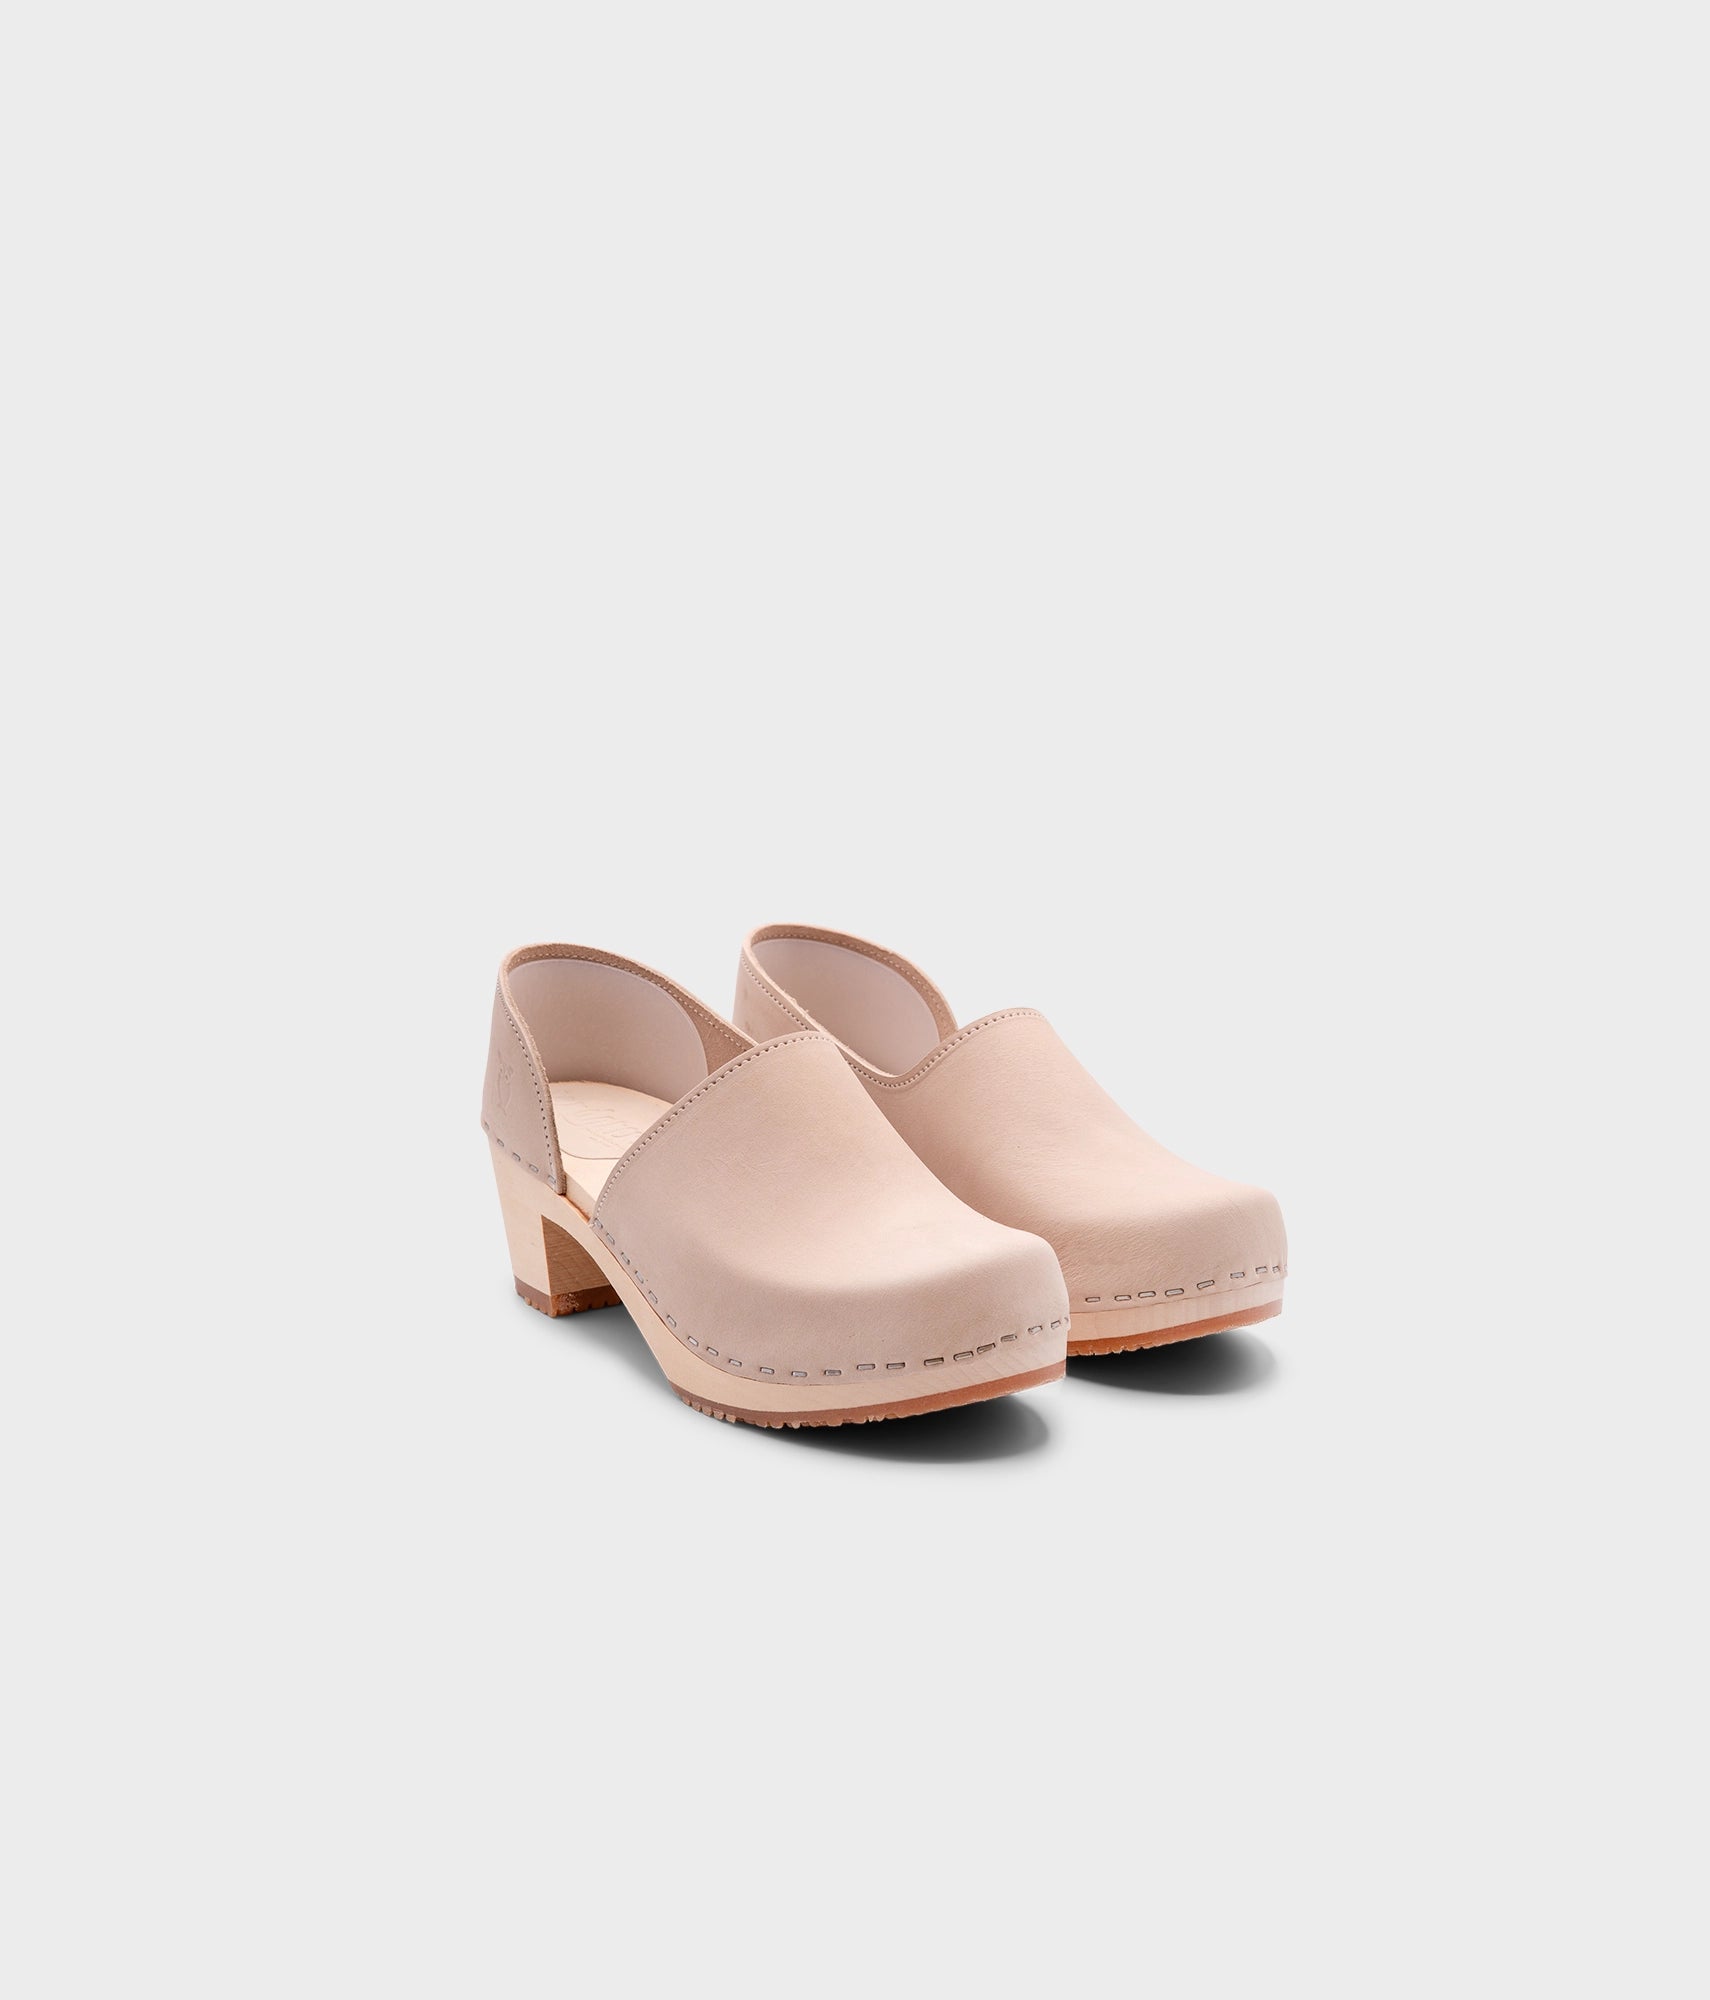 high heeled closed-back clogs in sand white nubuck leather stapled on a light wooden base